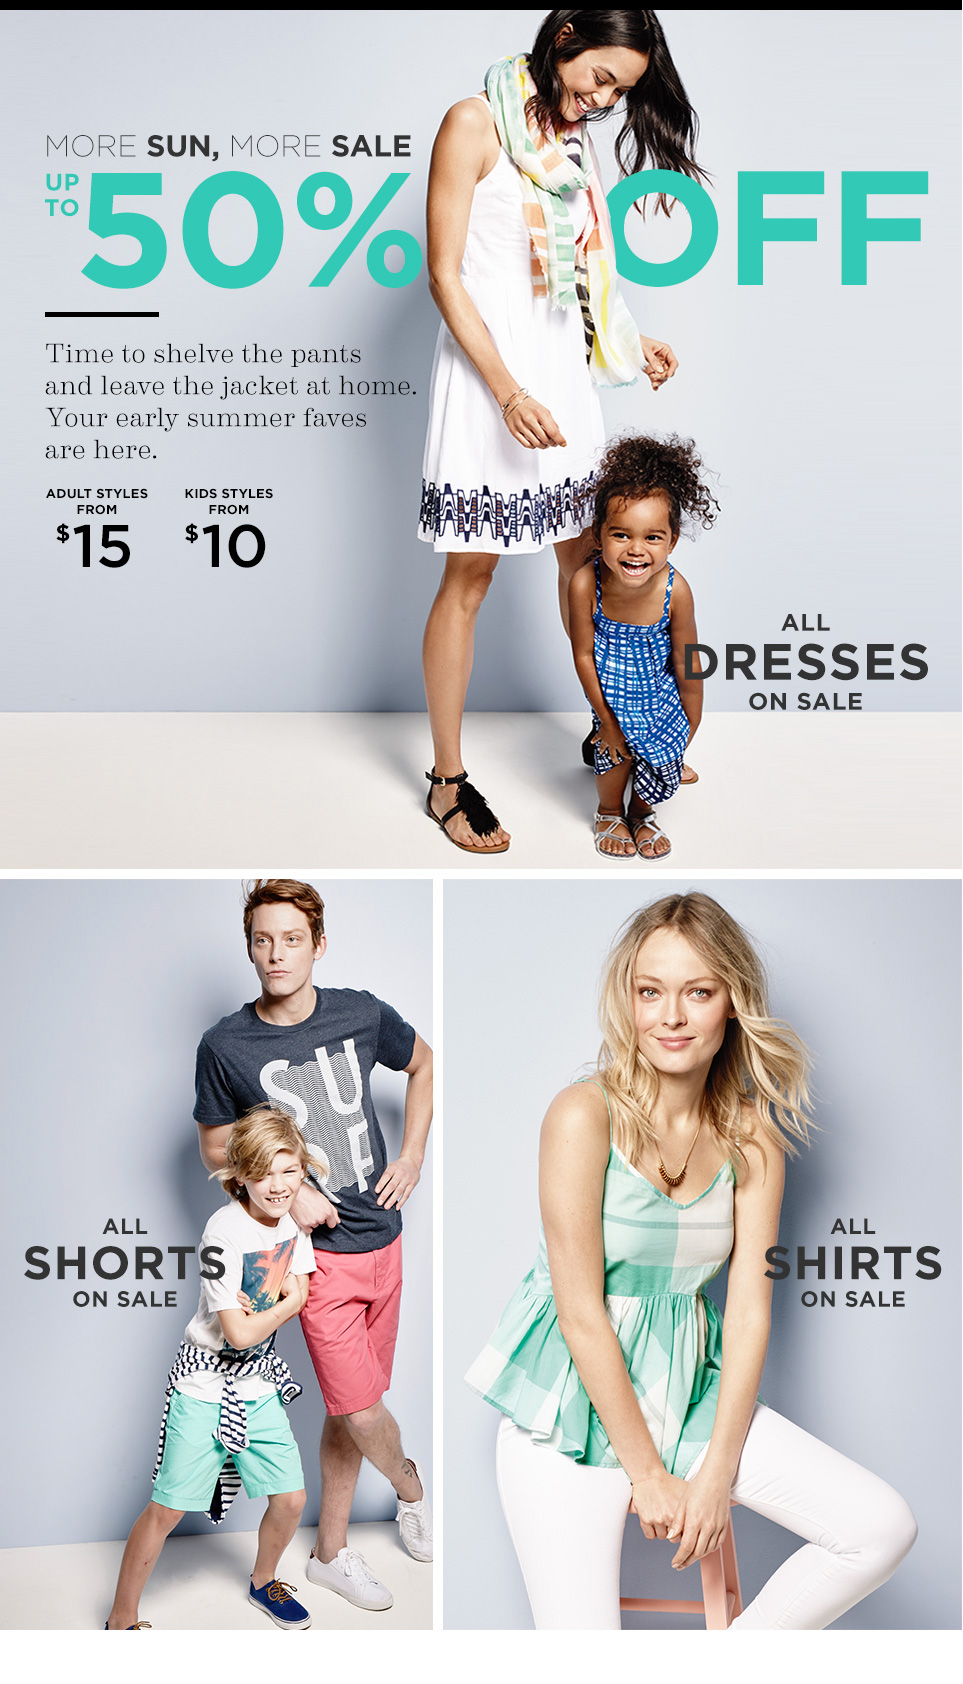 *HOT* FREE Shipping on EVERY Old Navy Order! No Minimum!